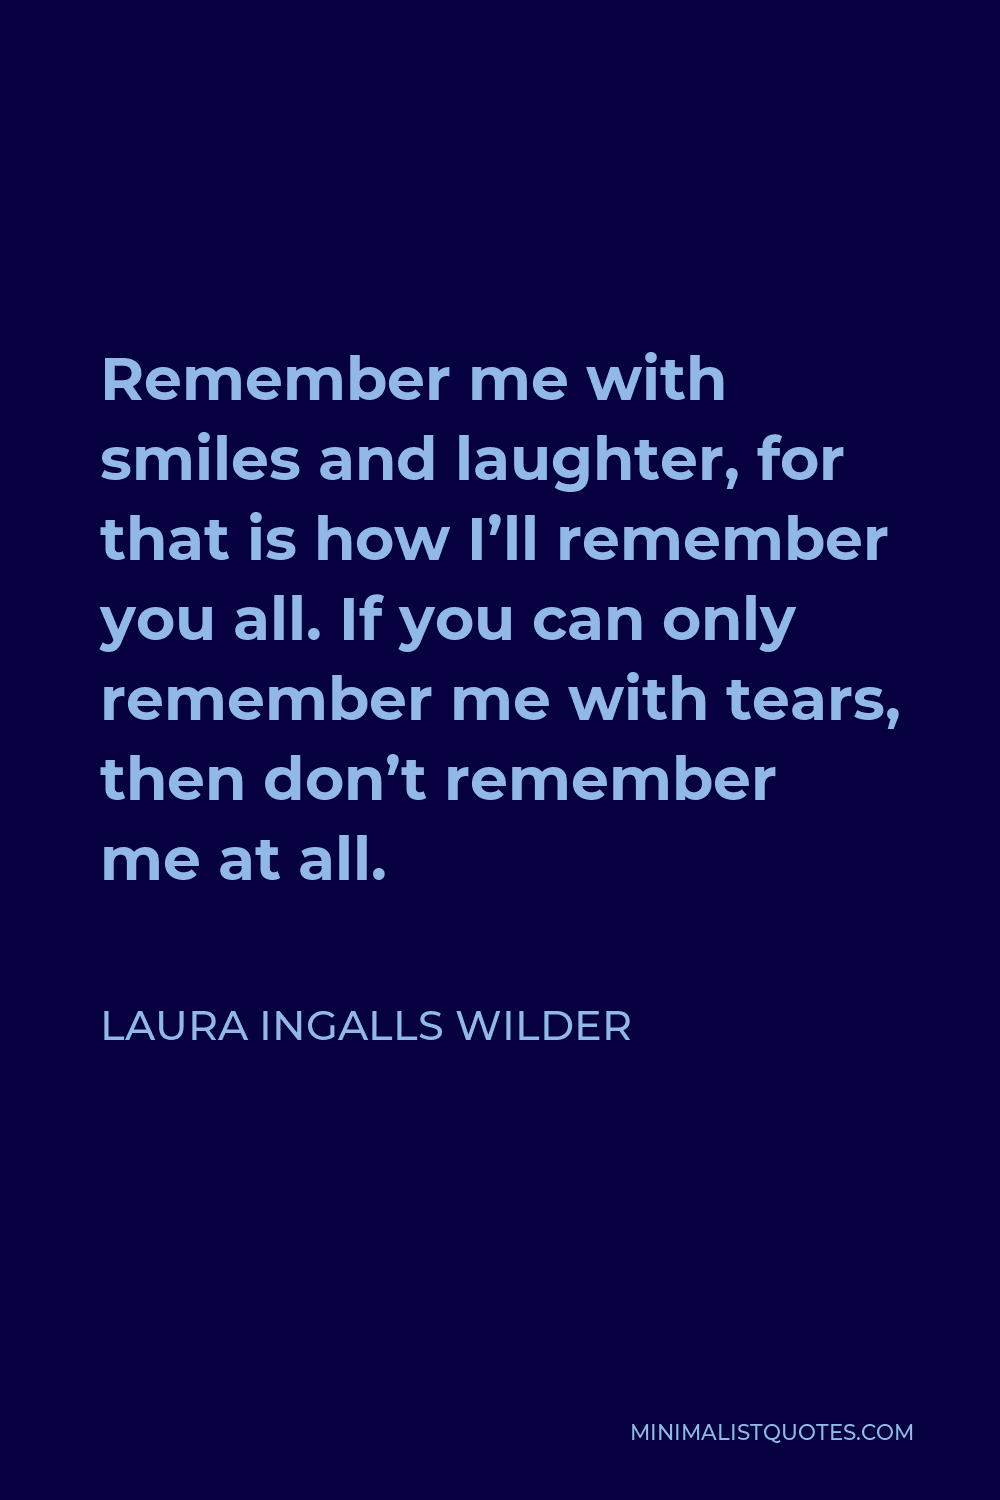 Laura Ingalls Wilder Quote: Remember me with smiles and laughter ...